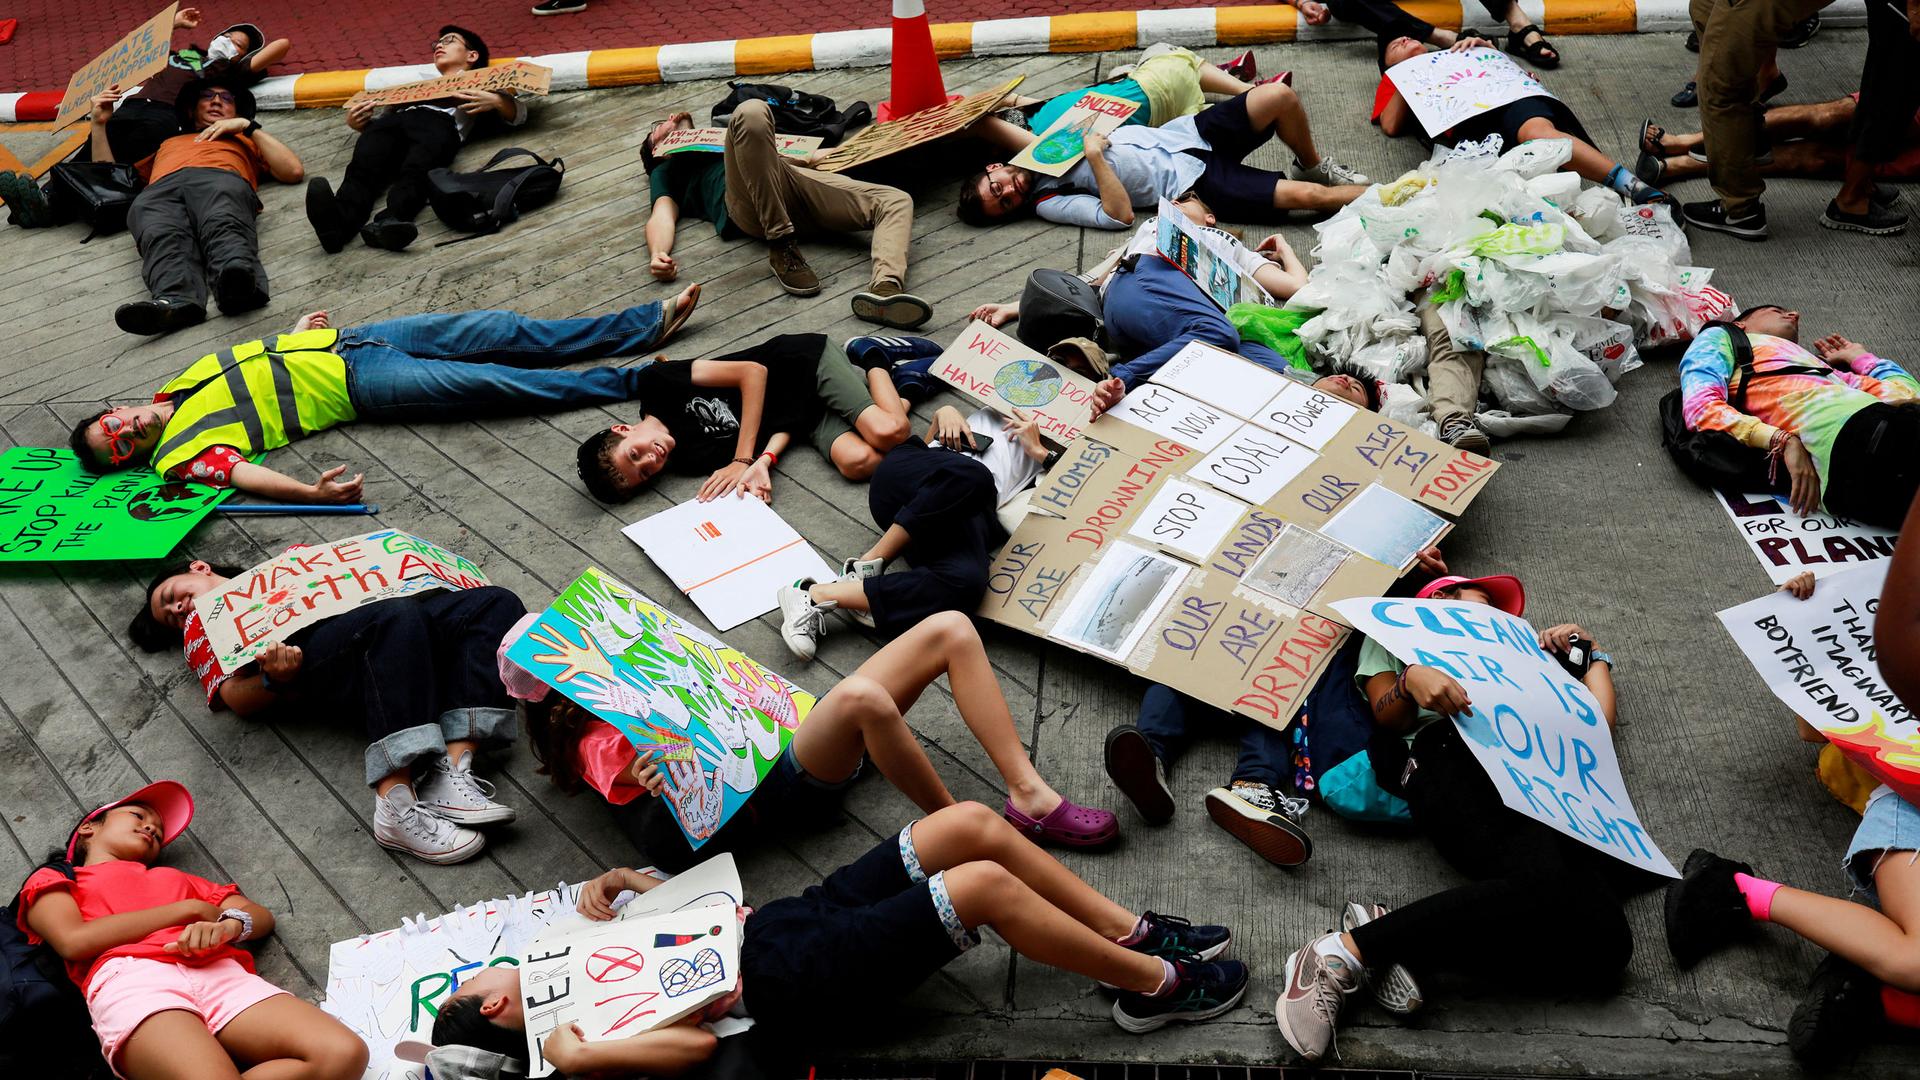 Several young people are shown laying down on the ground with placards protesting for climate change action.